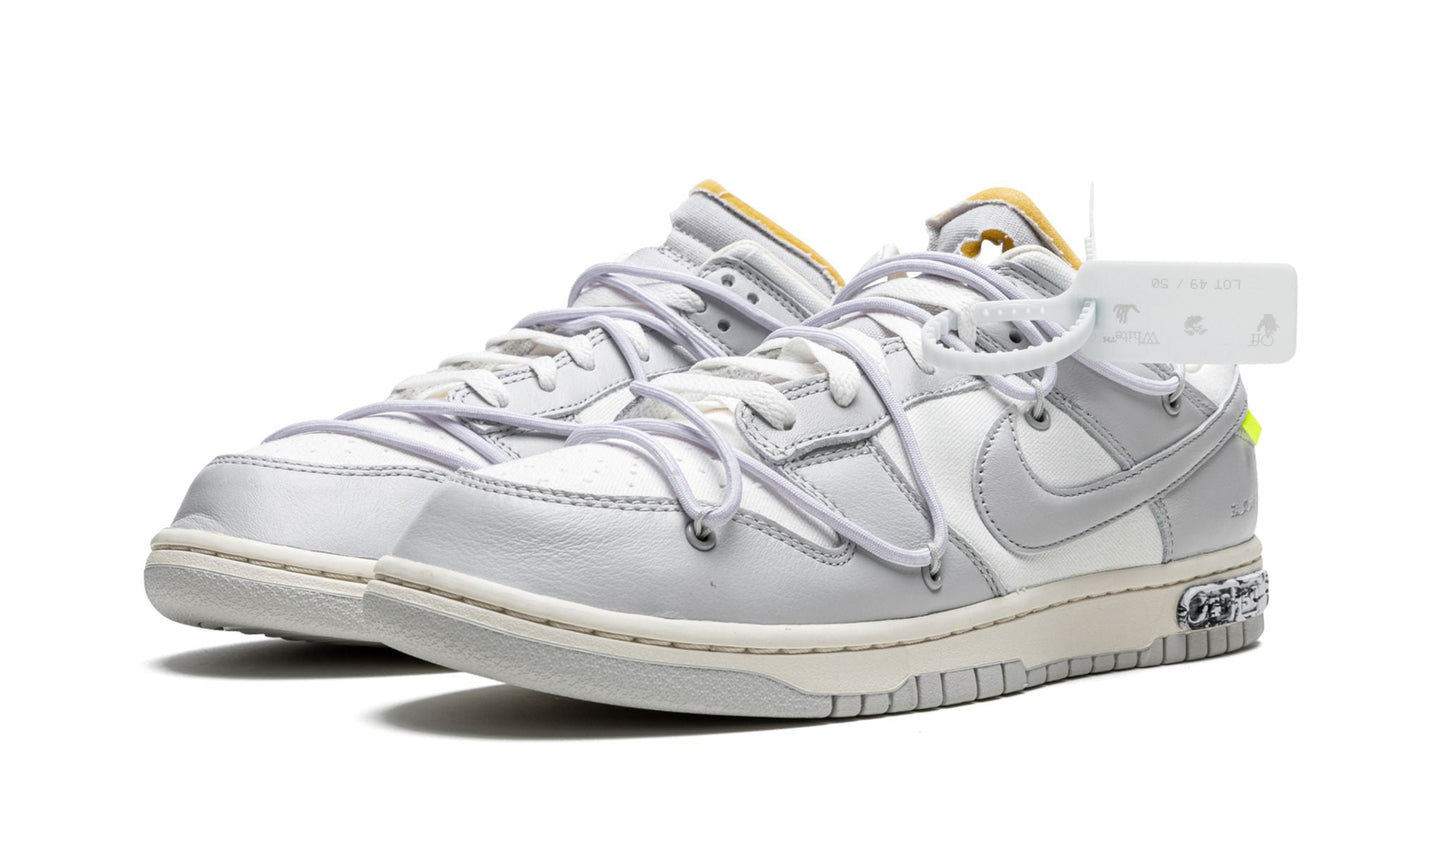 NIKE X OFF-WHITE DUNK LOW "Off-White - Lot 49"